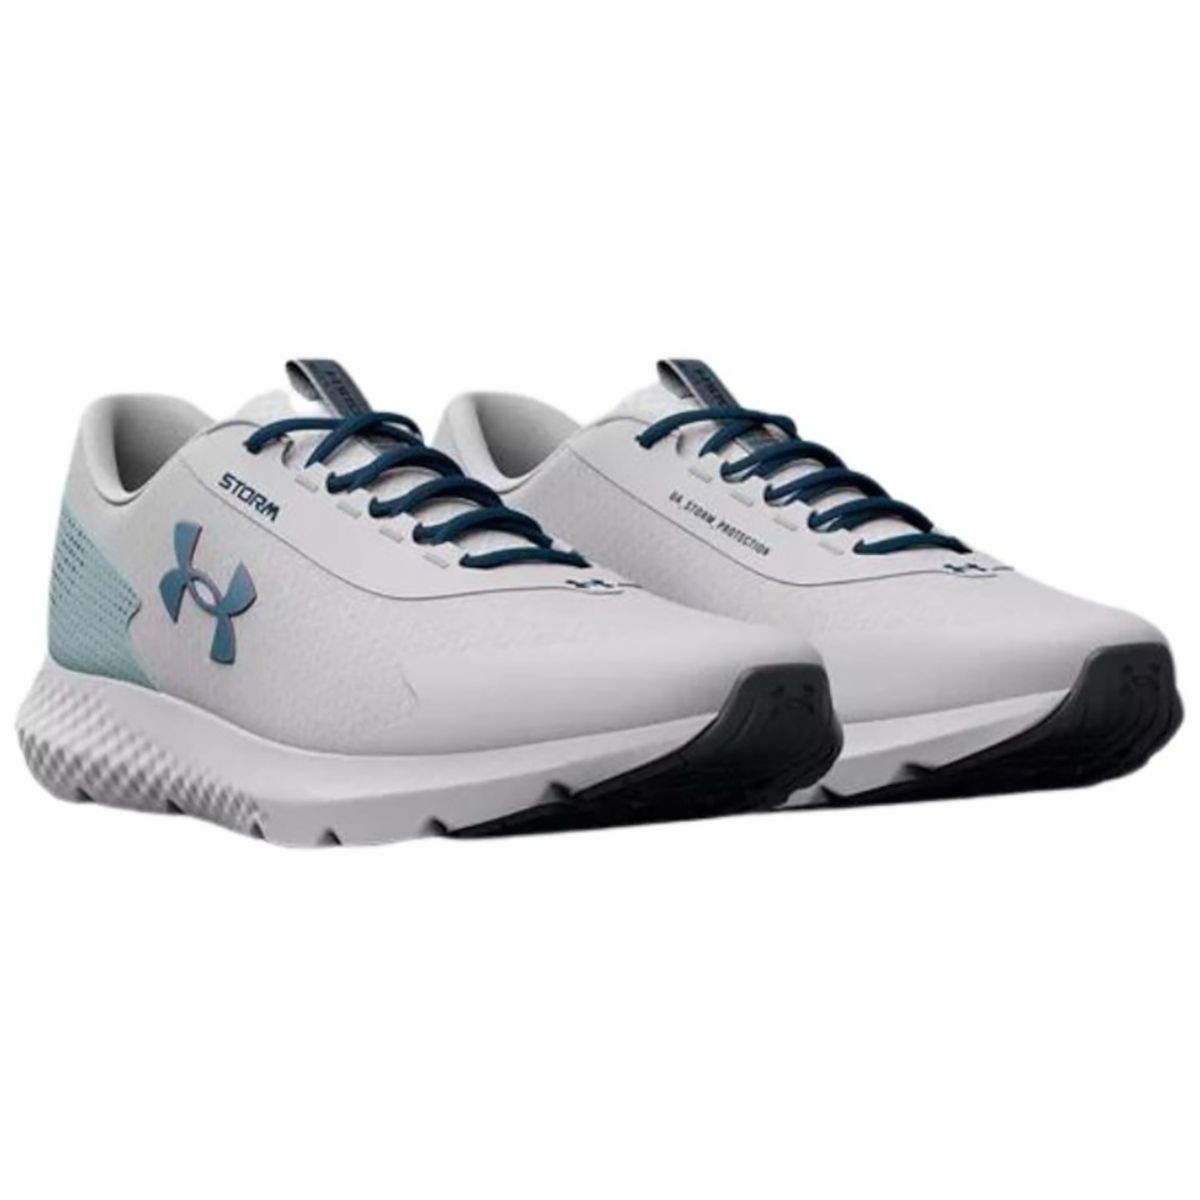 Zapatillas Under Armour Mujer Running Surge 3 SKY - 3025018-300 UNDER ARMOUR